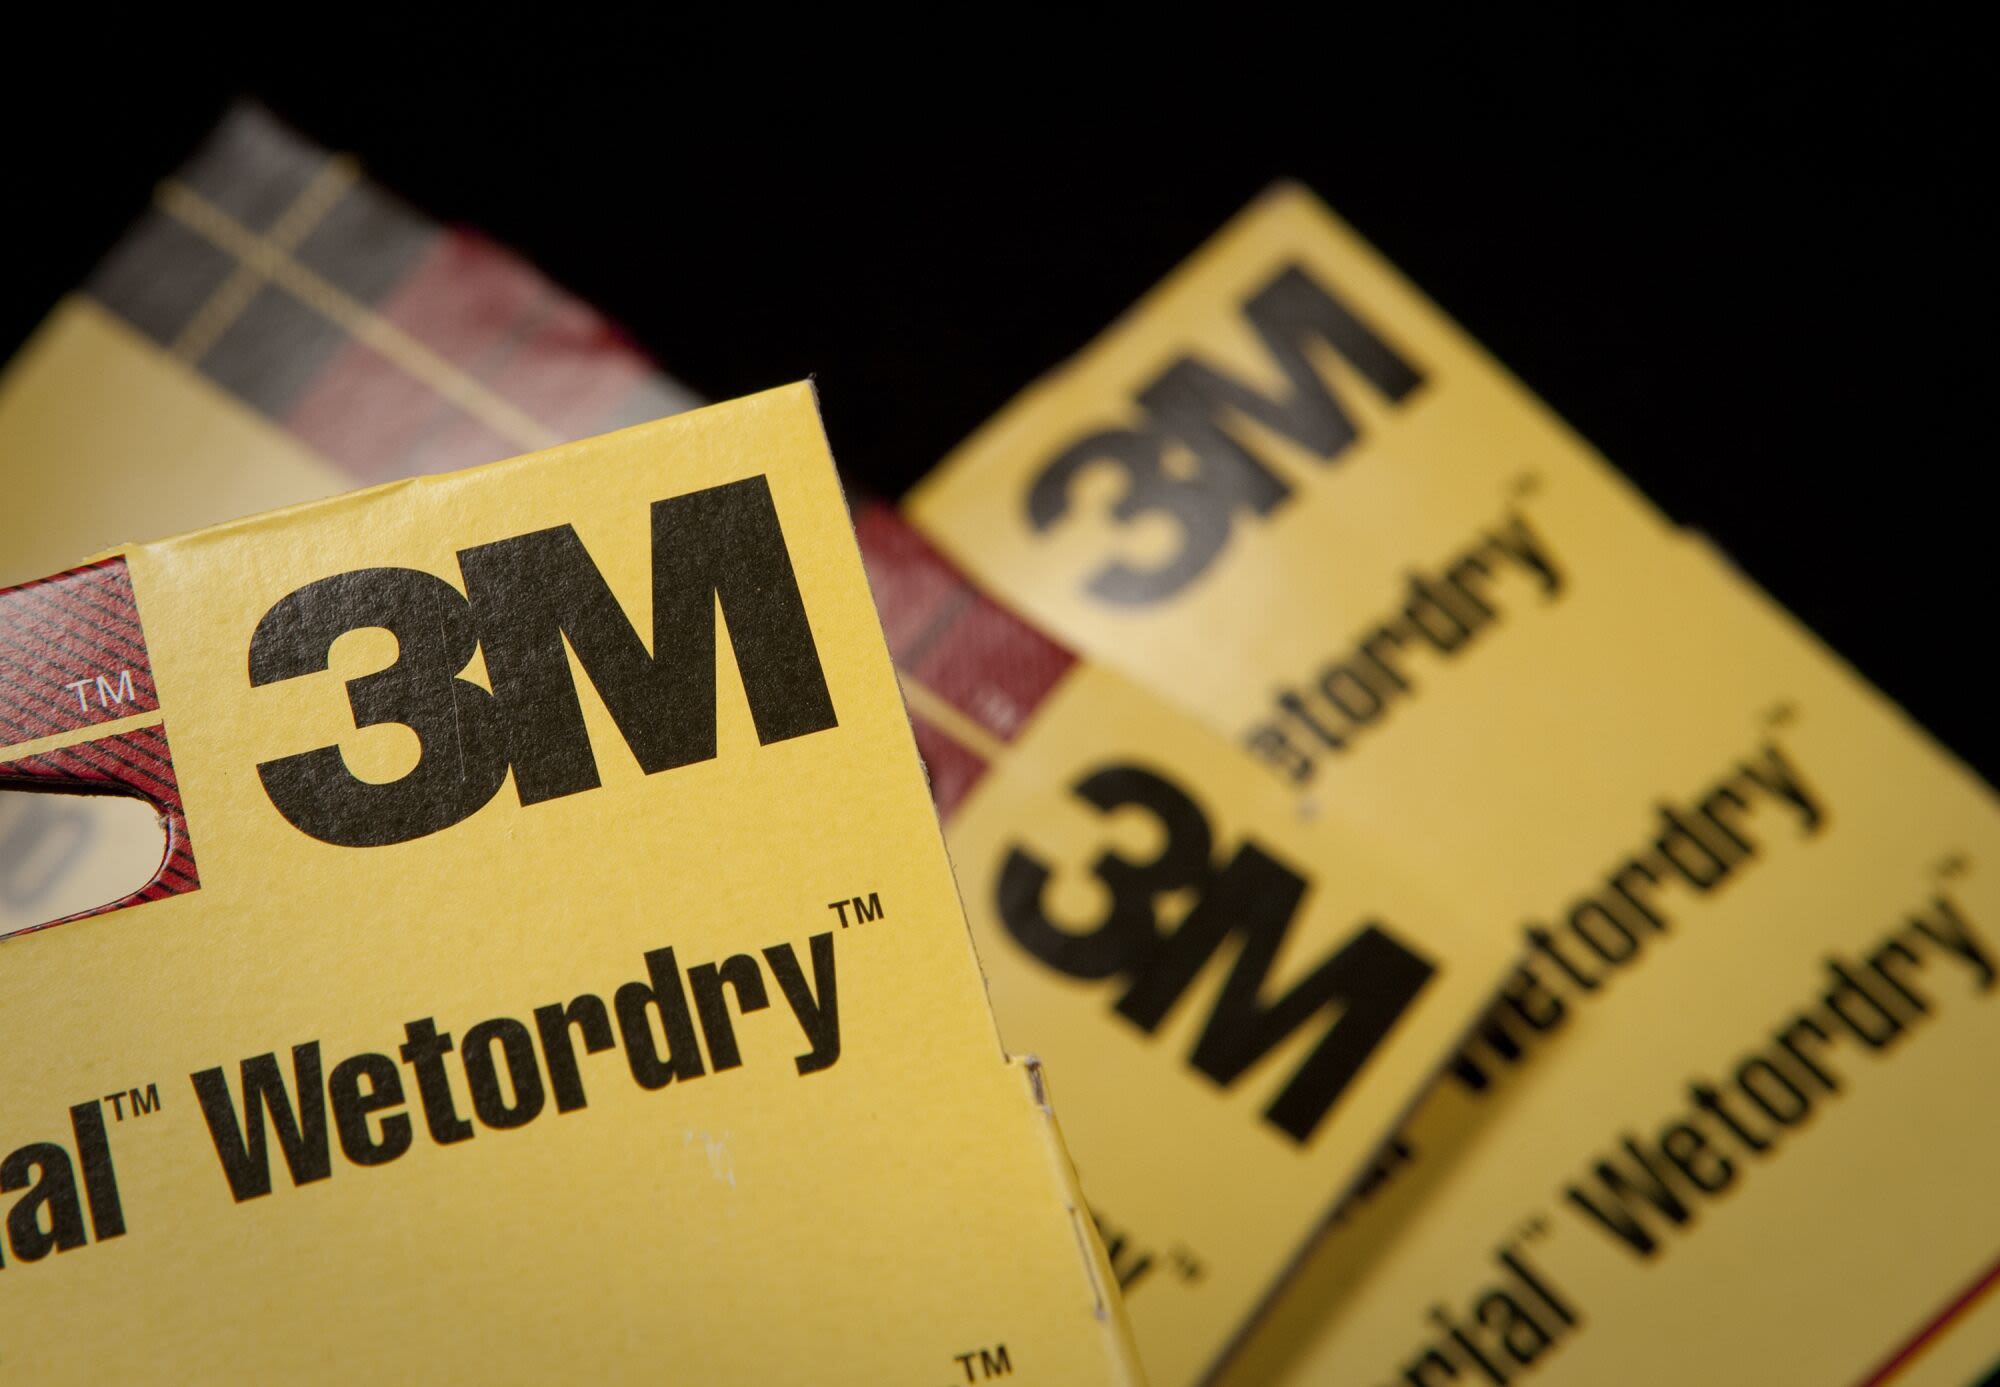 3M Soars Most Since 1980 as New CEO Offers Glimpse of Turnaround